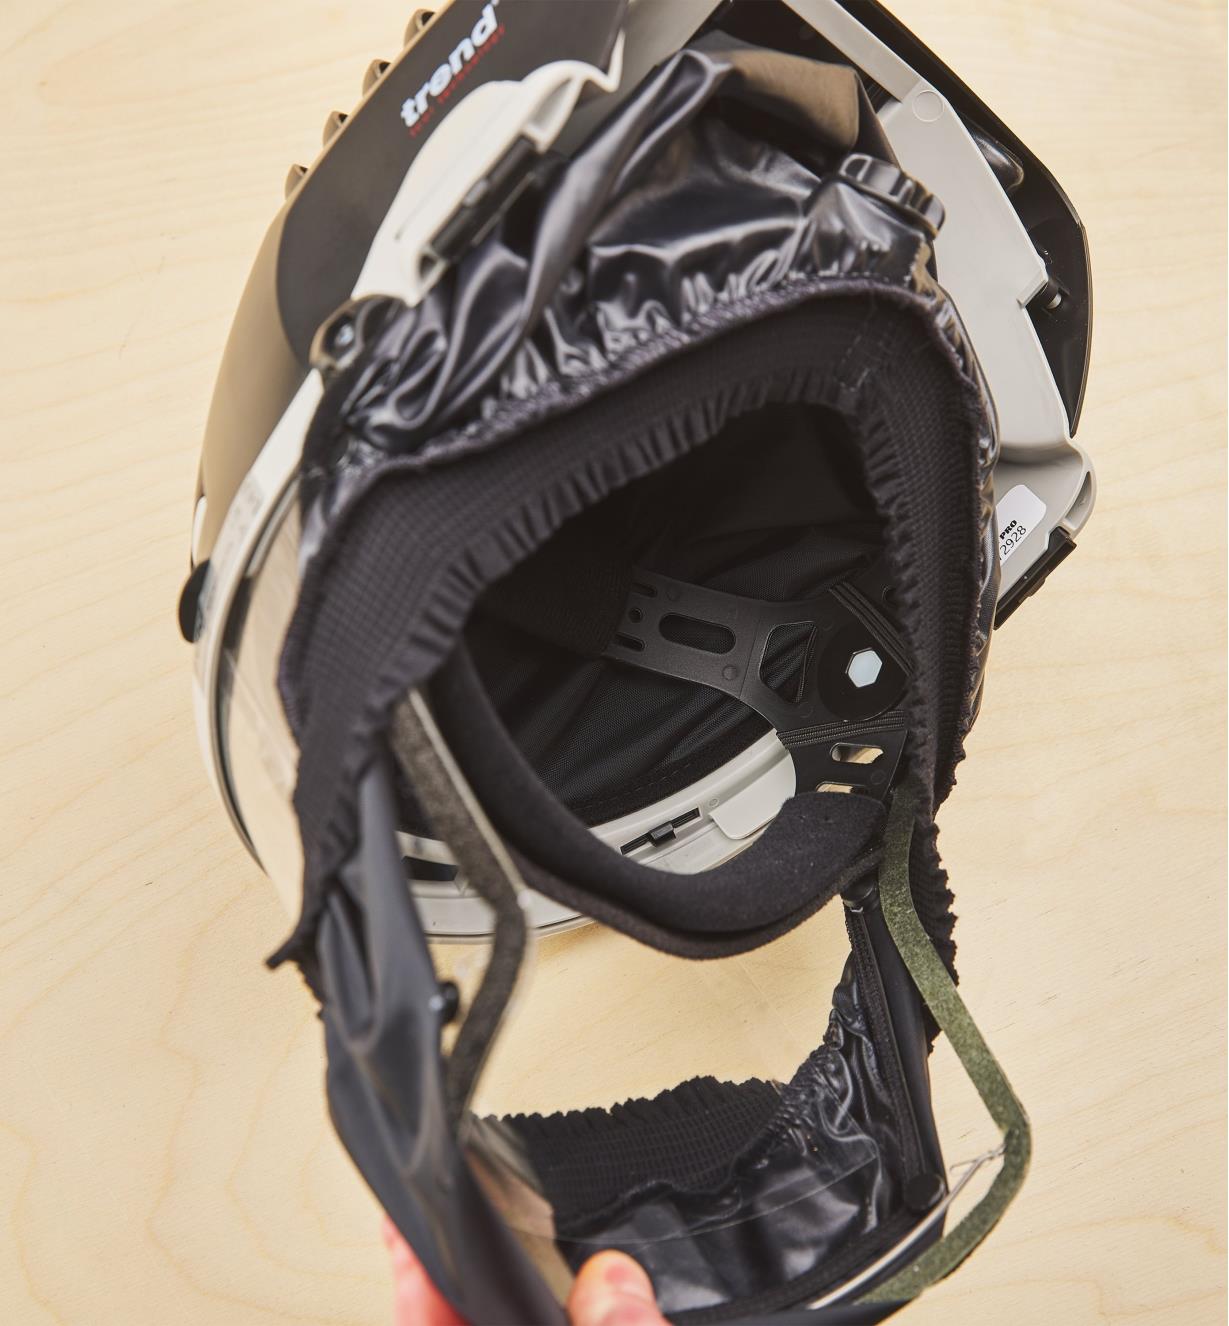 The inside of the helmet and face shield